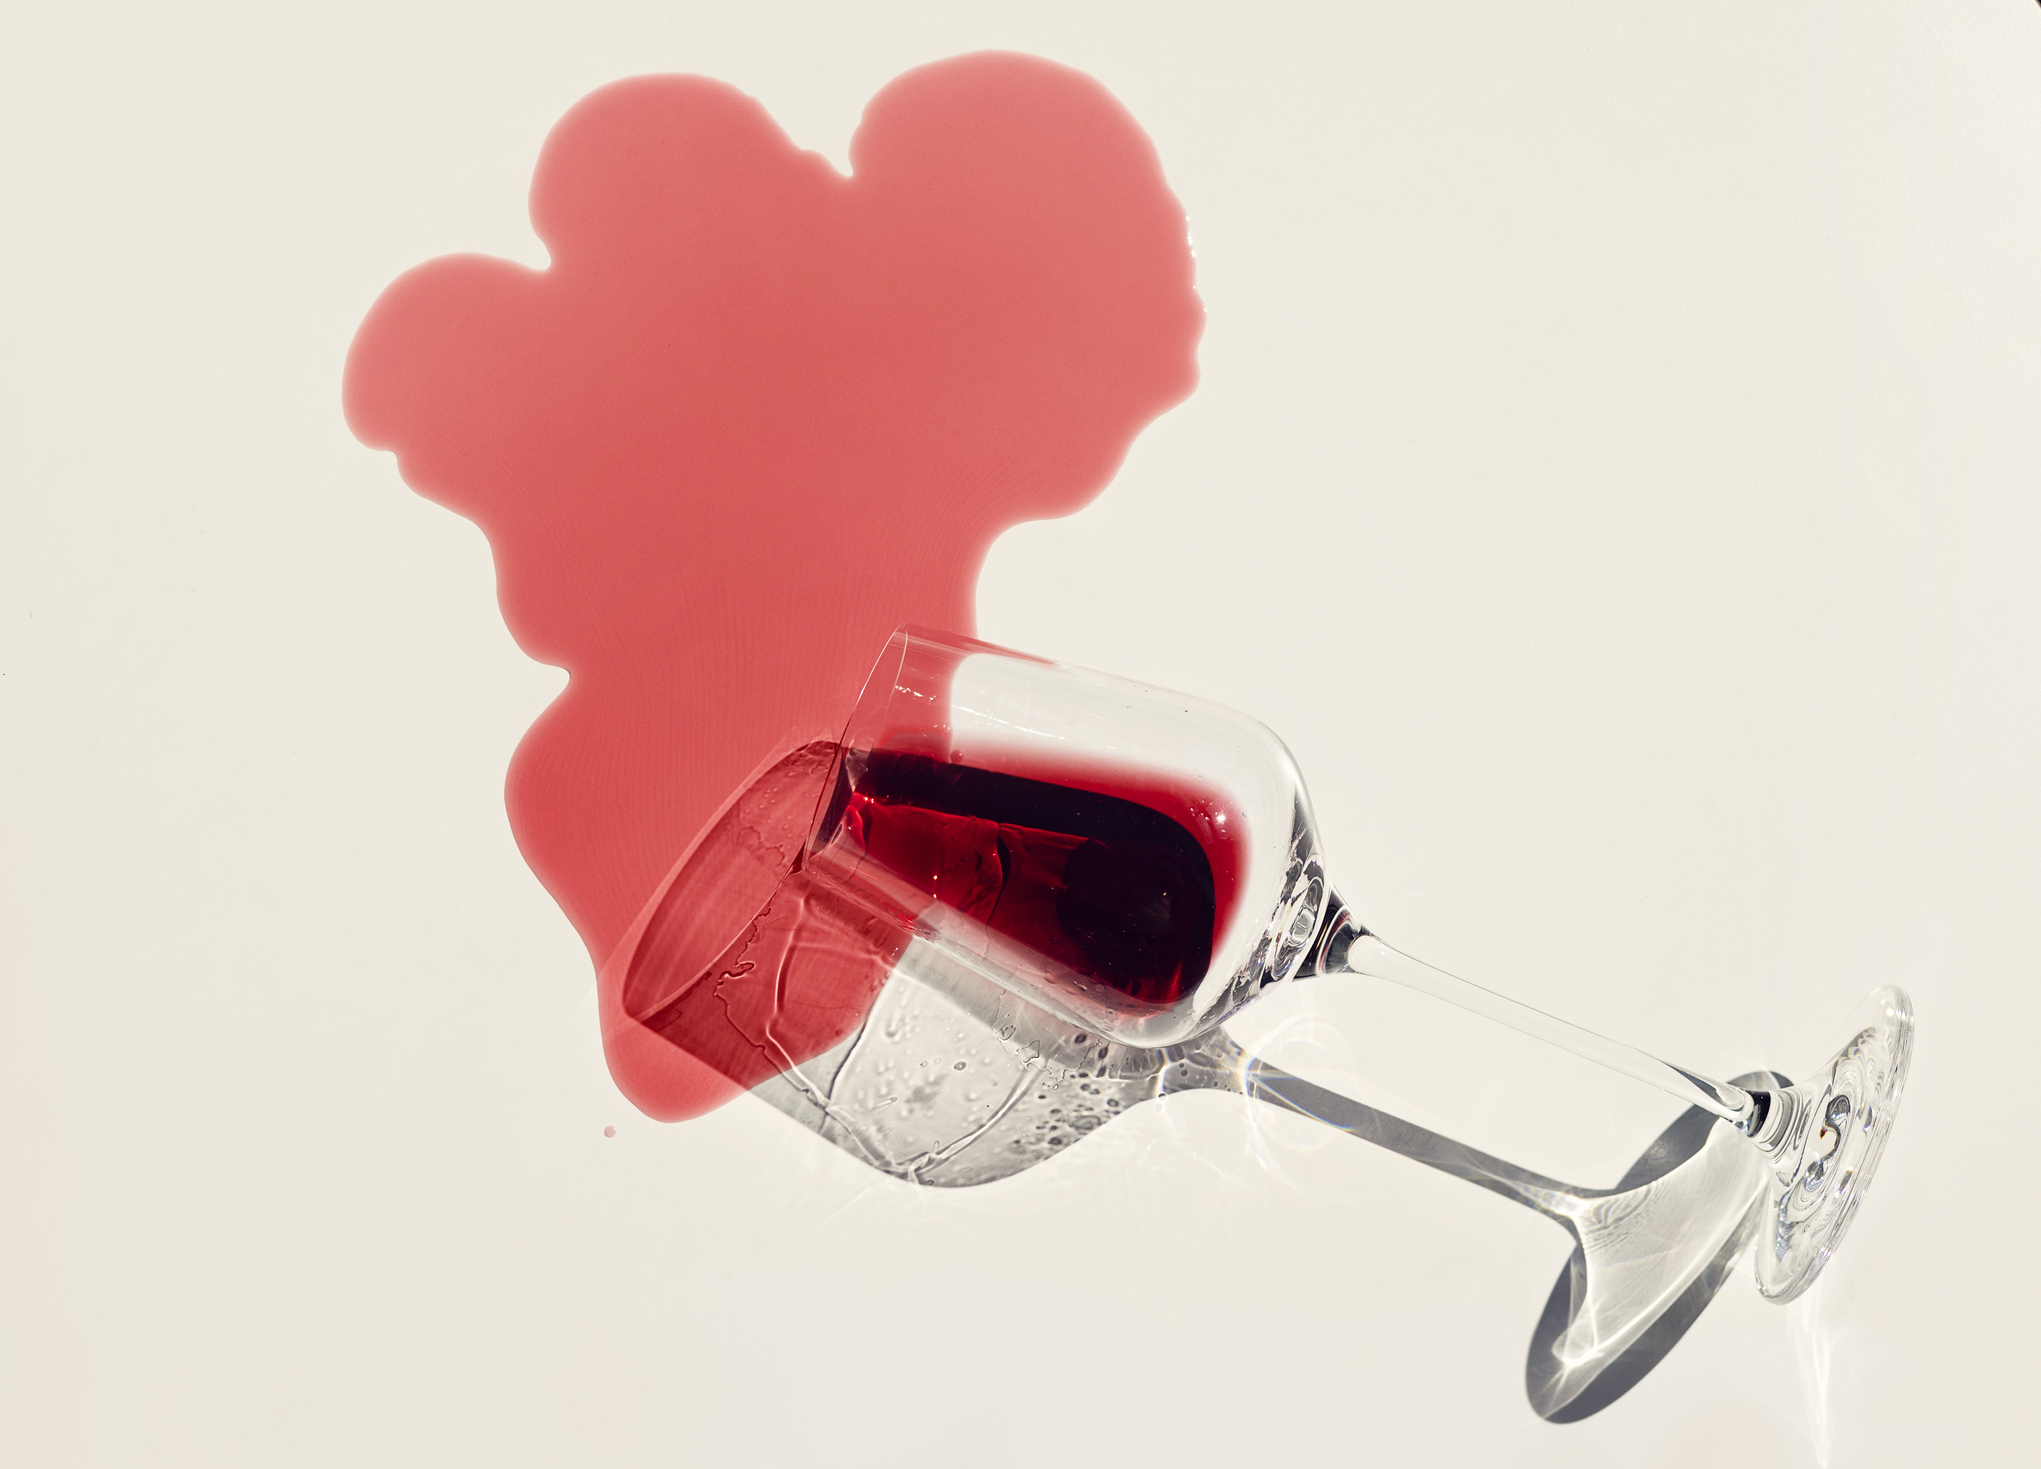 Wine glass tipped over with red liquid splashing out in the shape of a heart